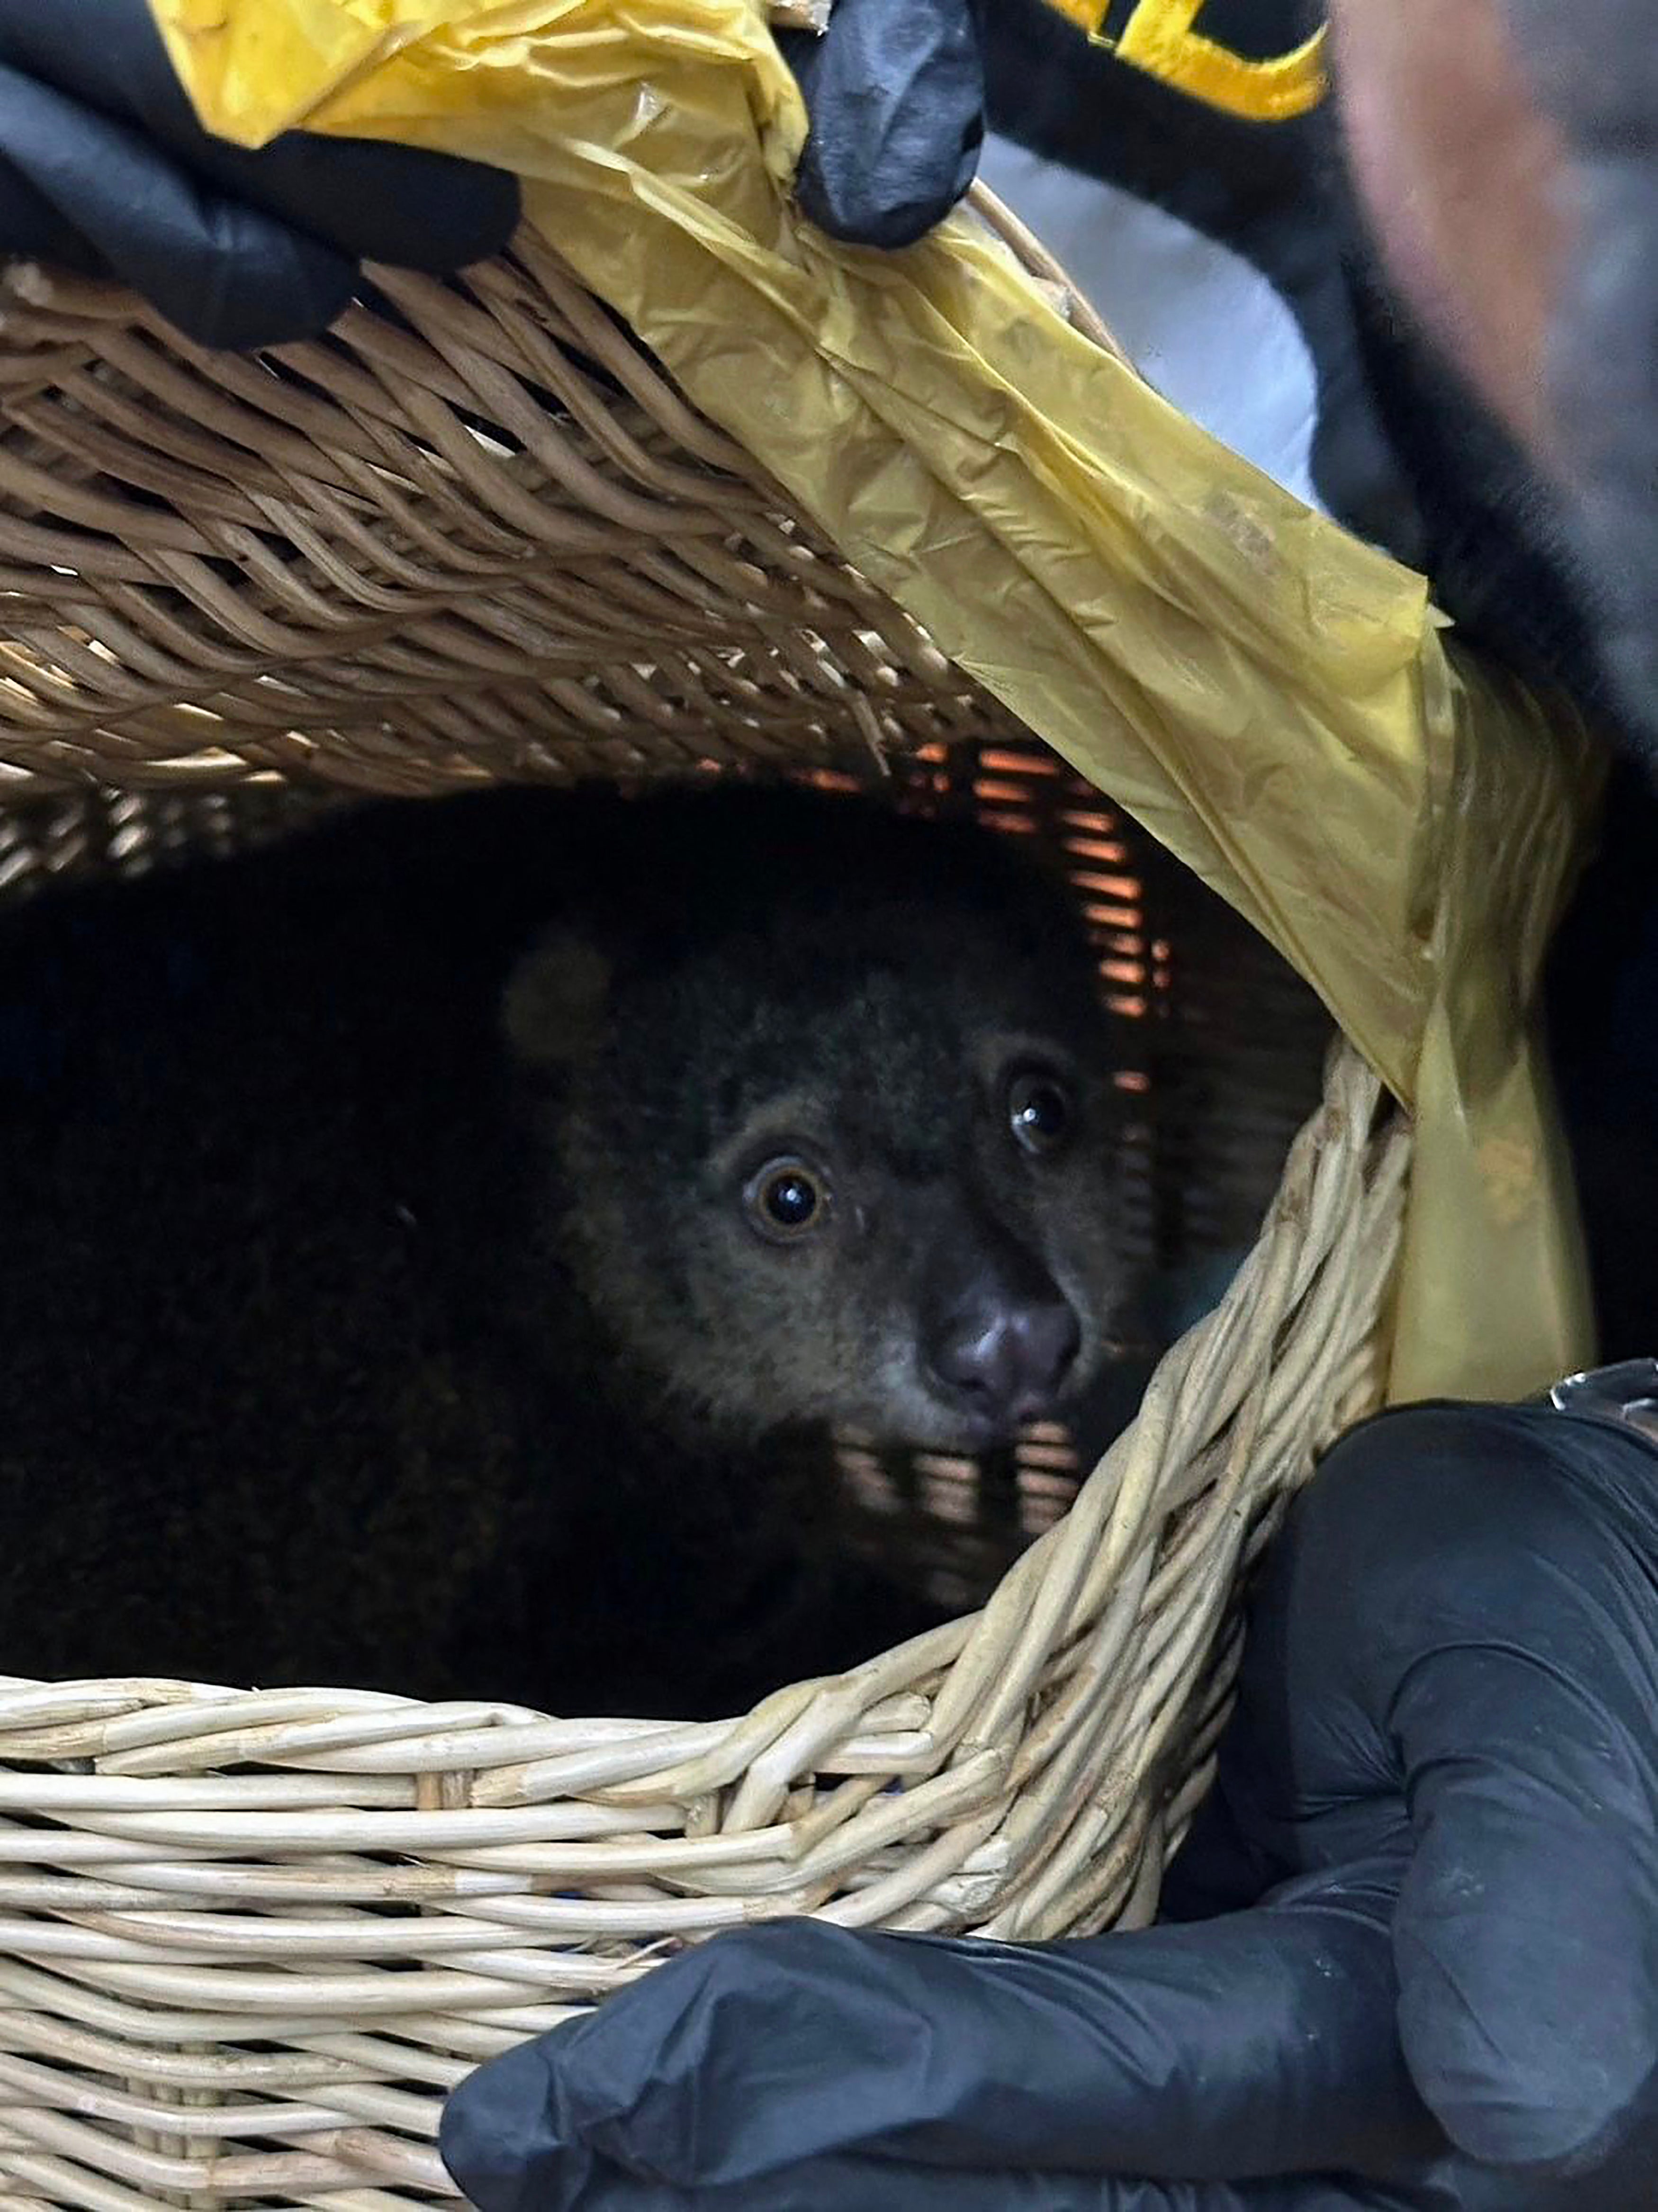 A Sulawesi bear cuscus that was rescued after being found in the luggage of a group of Indian nationals attempting to travel to Mumbai, at Suvarnabhumi International Airport in Bangkok